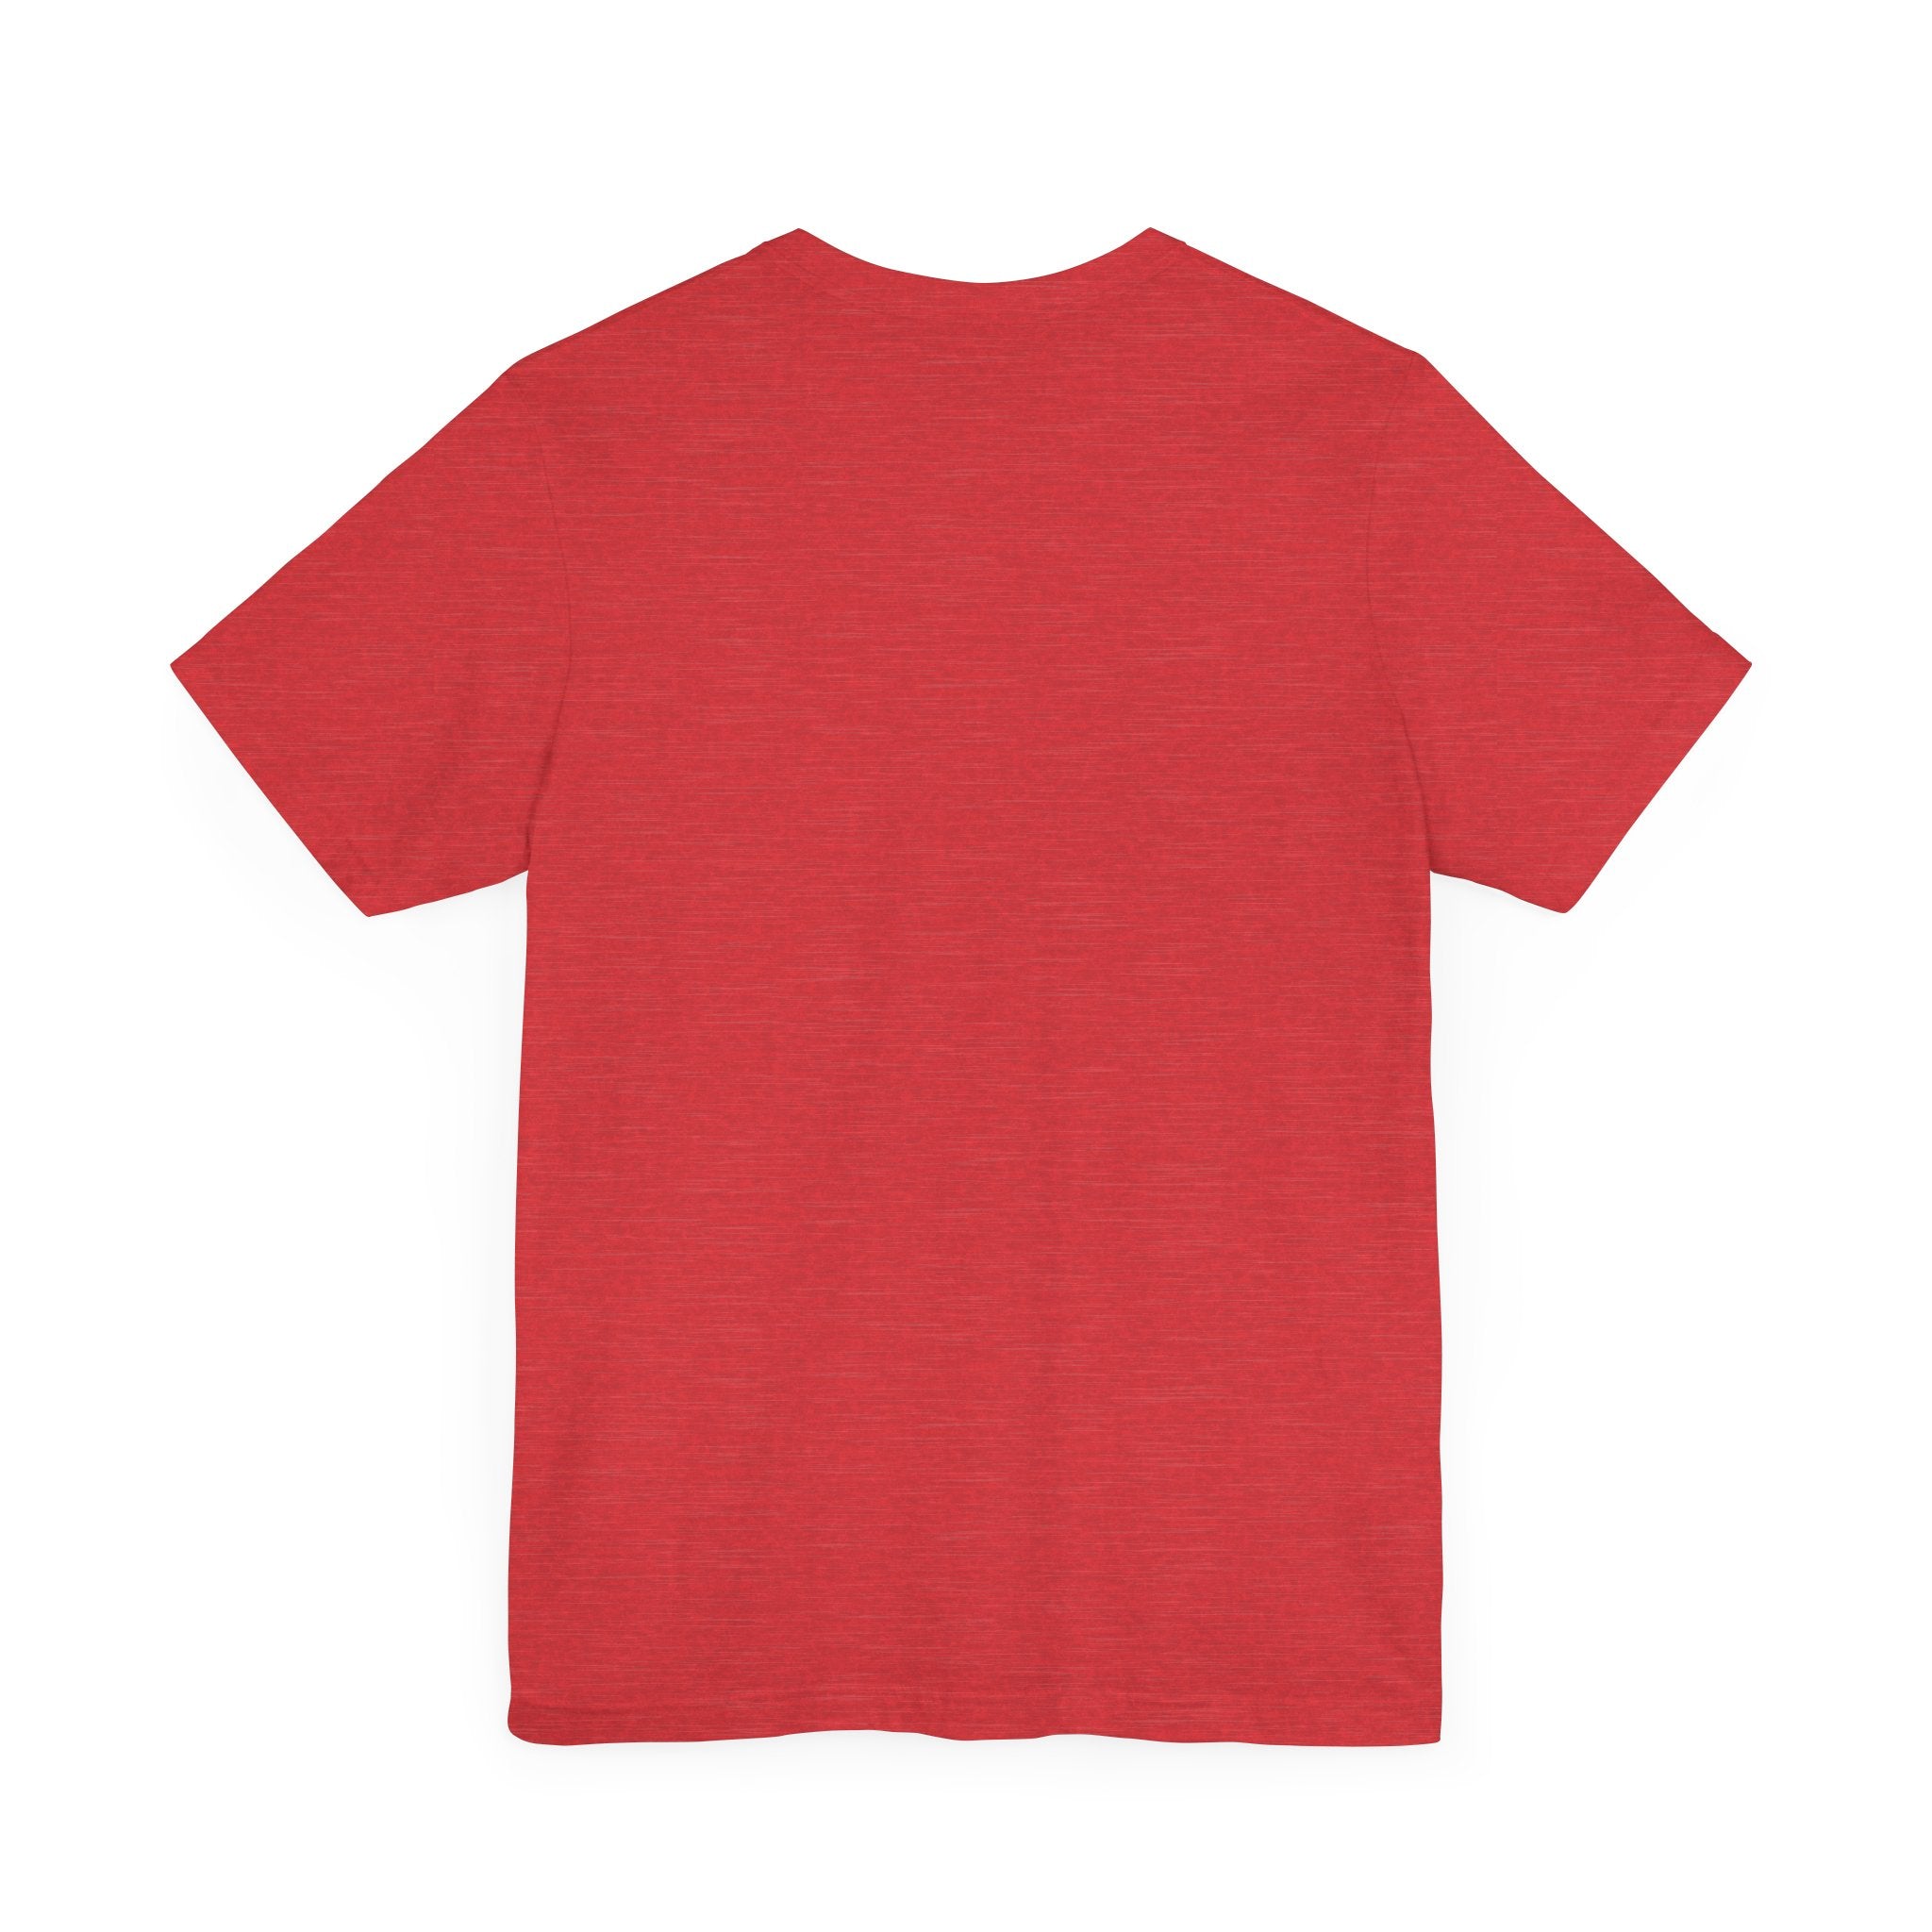 Back view of a stylish red C-Ho-Co-La-Te - T-Shirt against a white background, featuring 100% Airlume cotton for ultimate comfort.